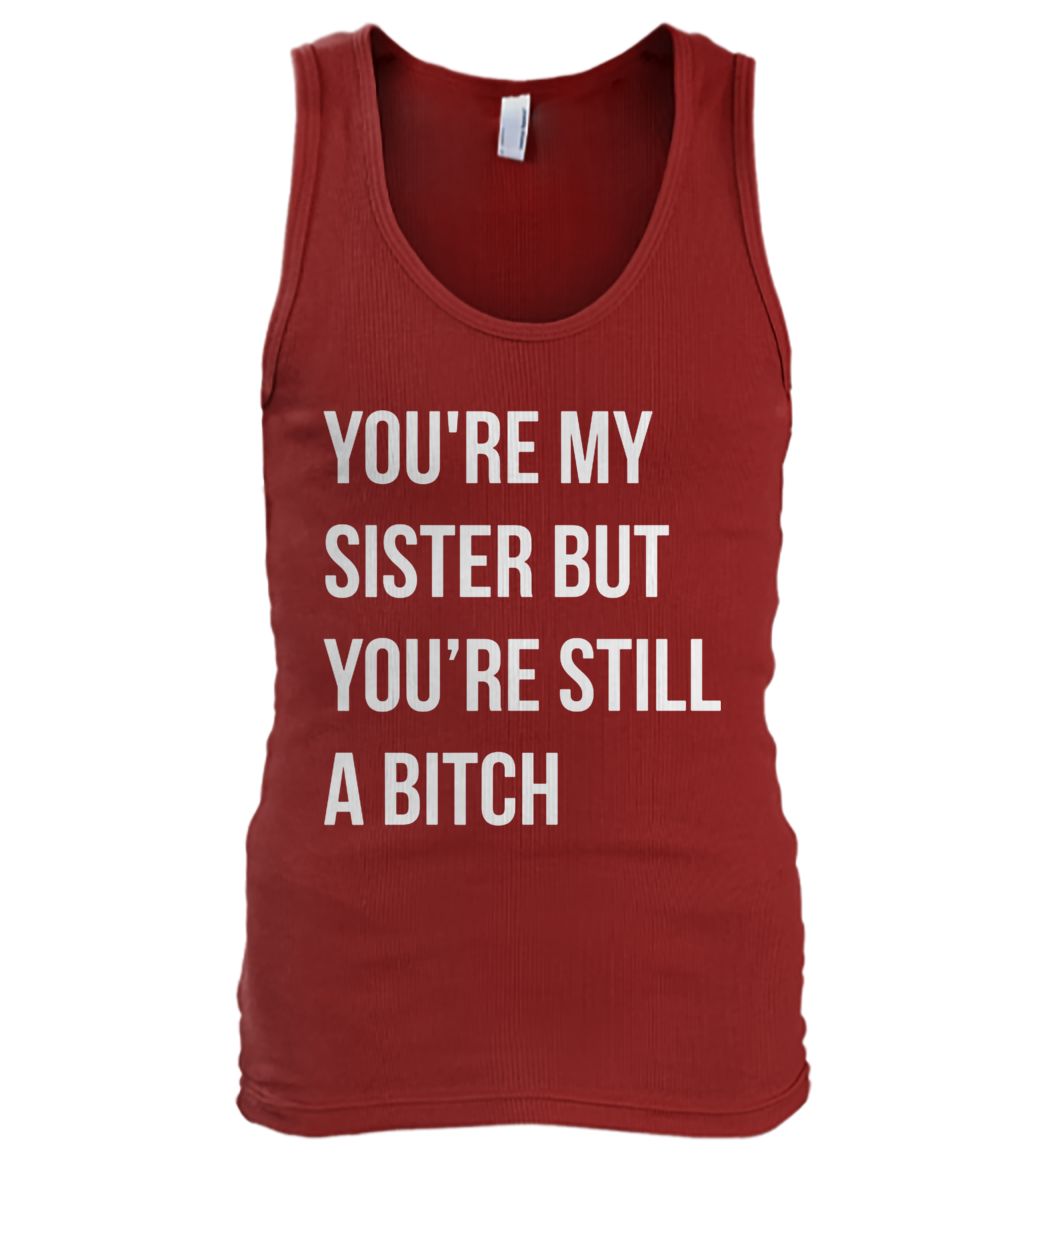 You're my sister but you're still a bitch men's tank top